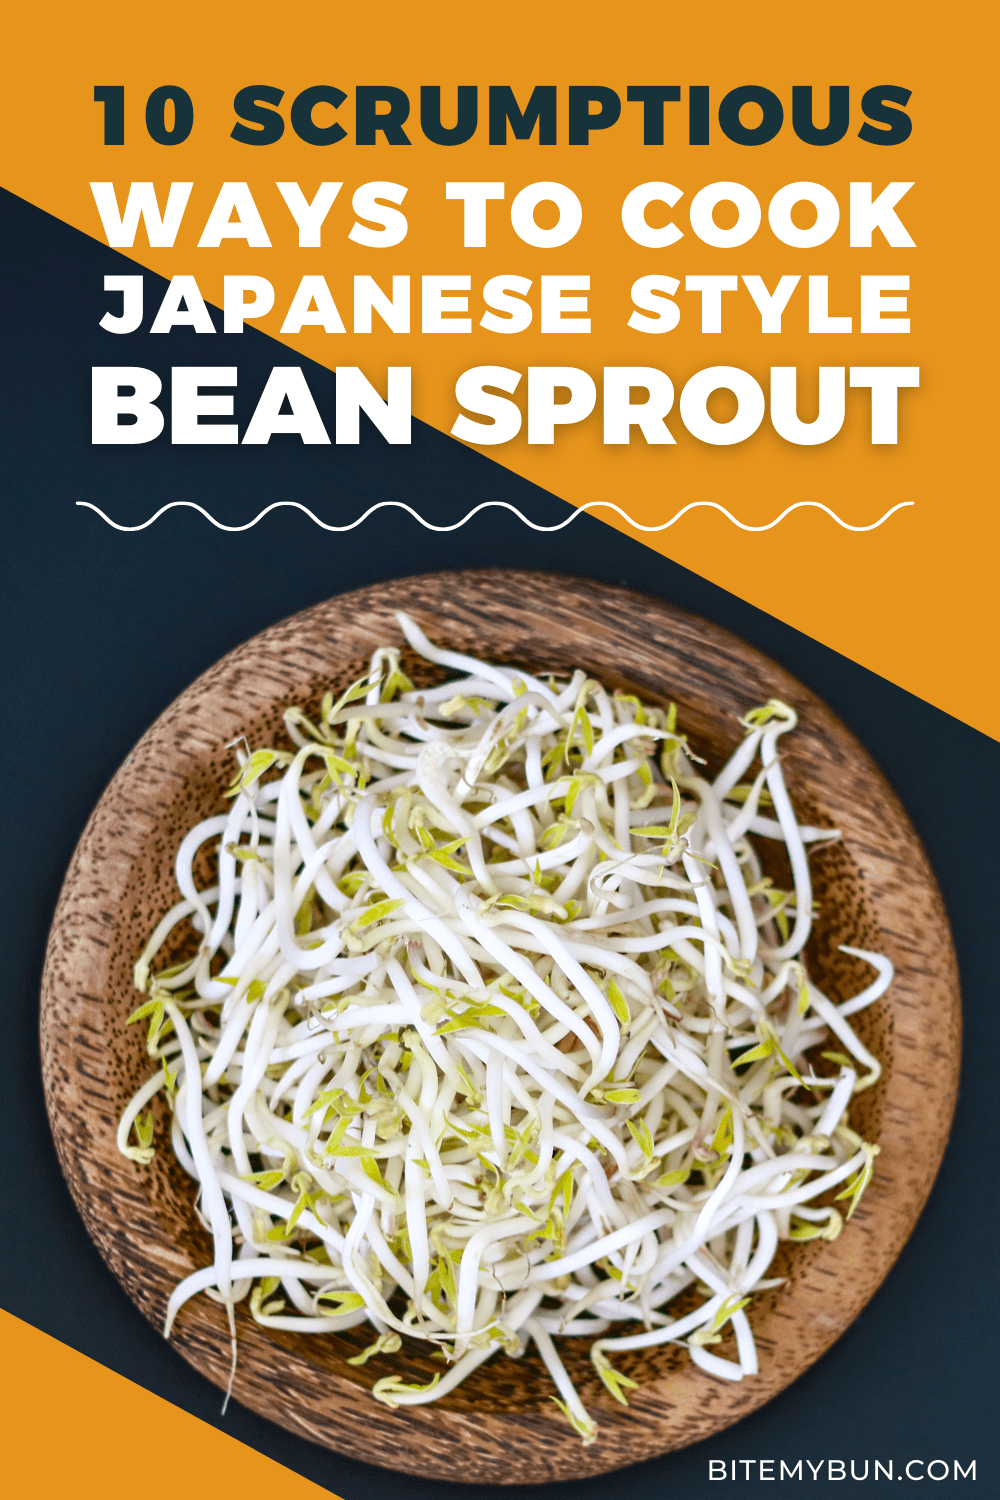 10 Scrumptious Ways to Cook Bean Sprout Japanese Style